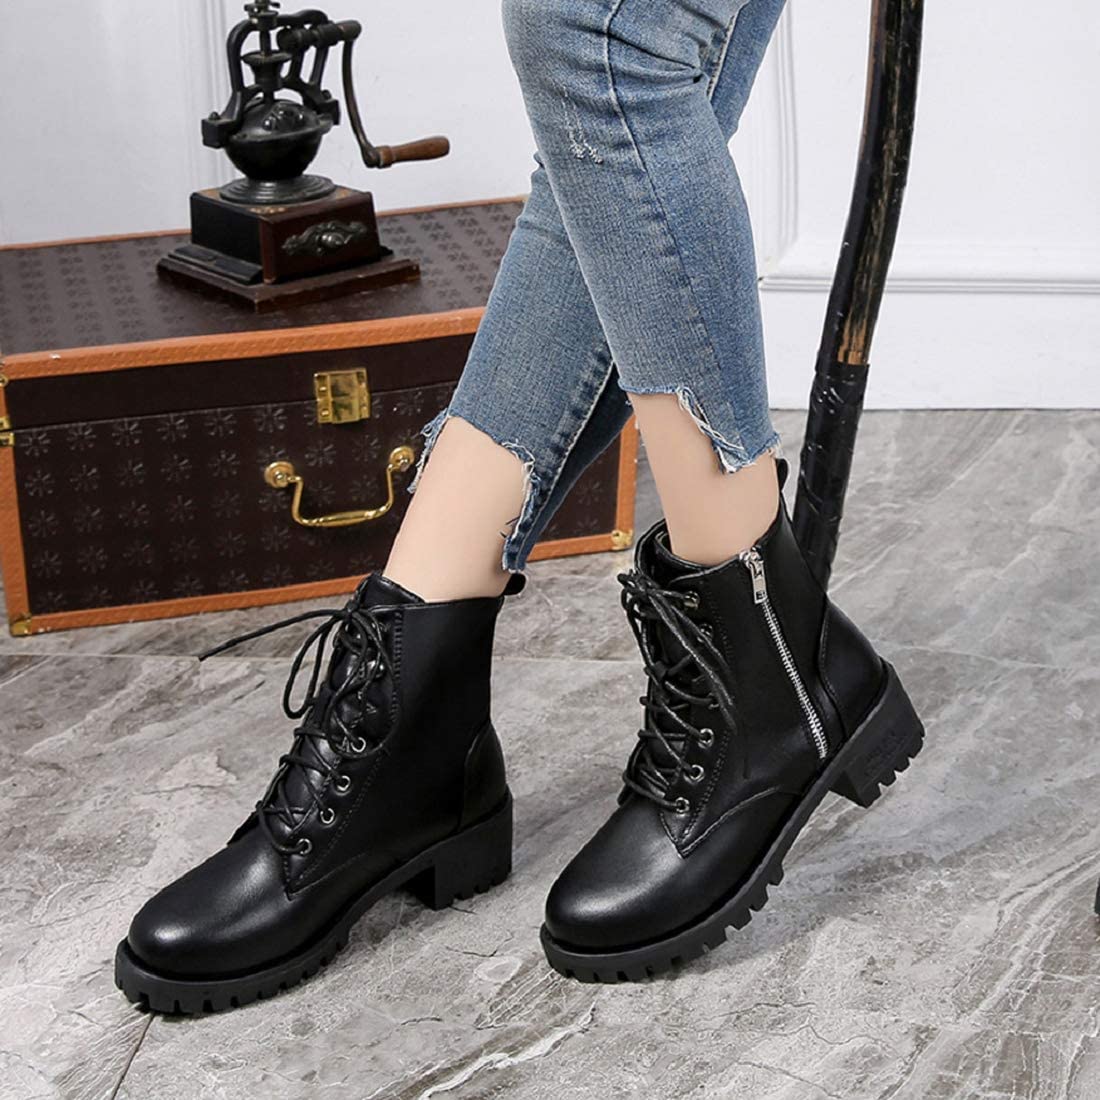 PAOLIAN Womens Boots Women's Lace Up Stacked Chunky Heel Ankle Short Booties Vintage Leather Side Zipper Short Cowboy Motorcycle Boot Shoes